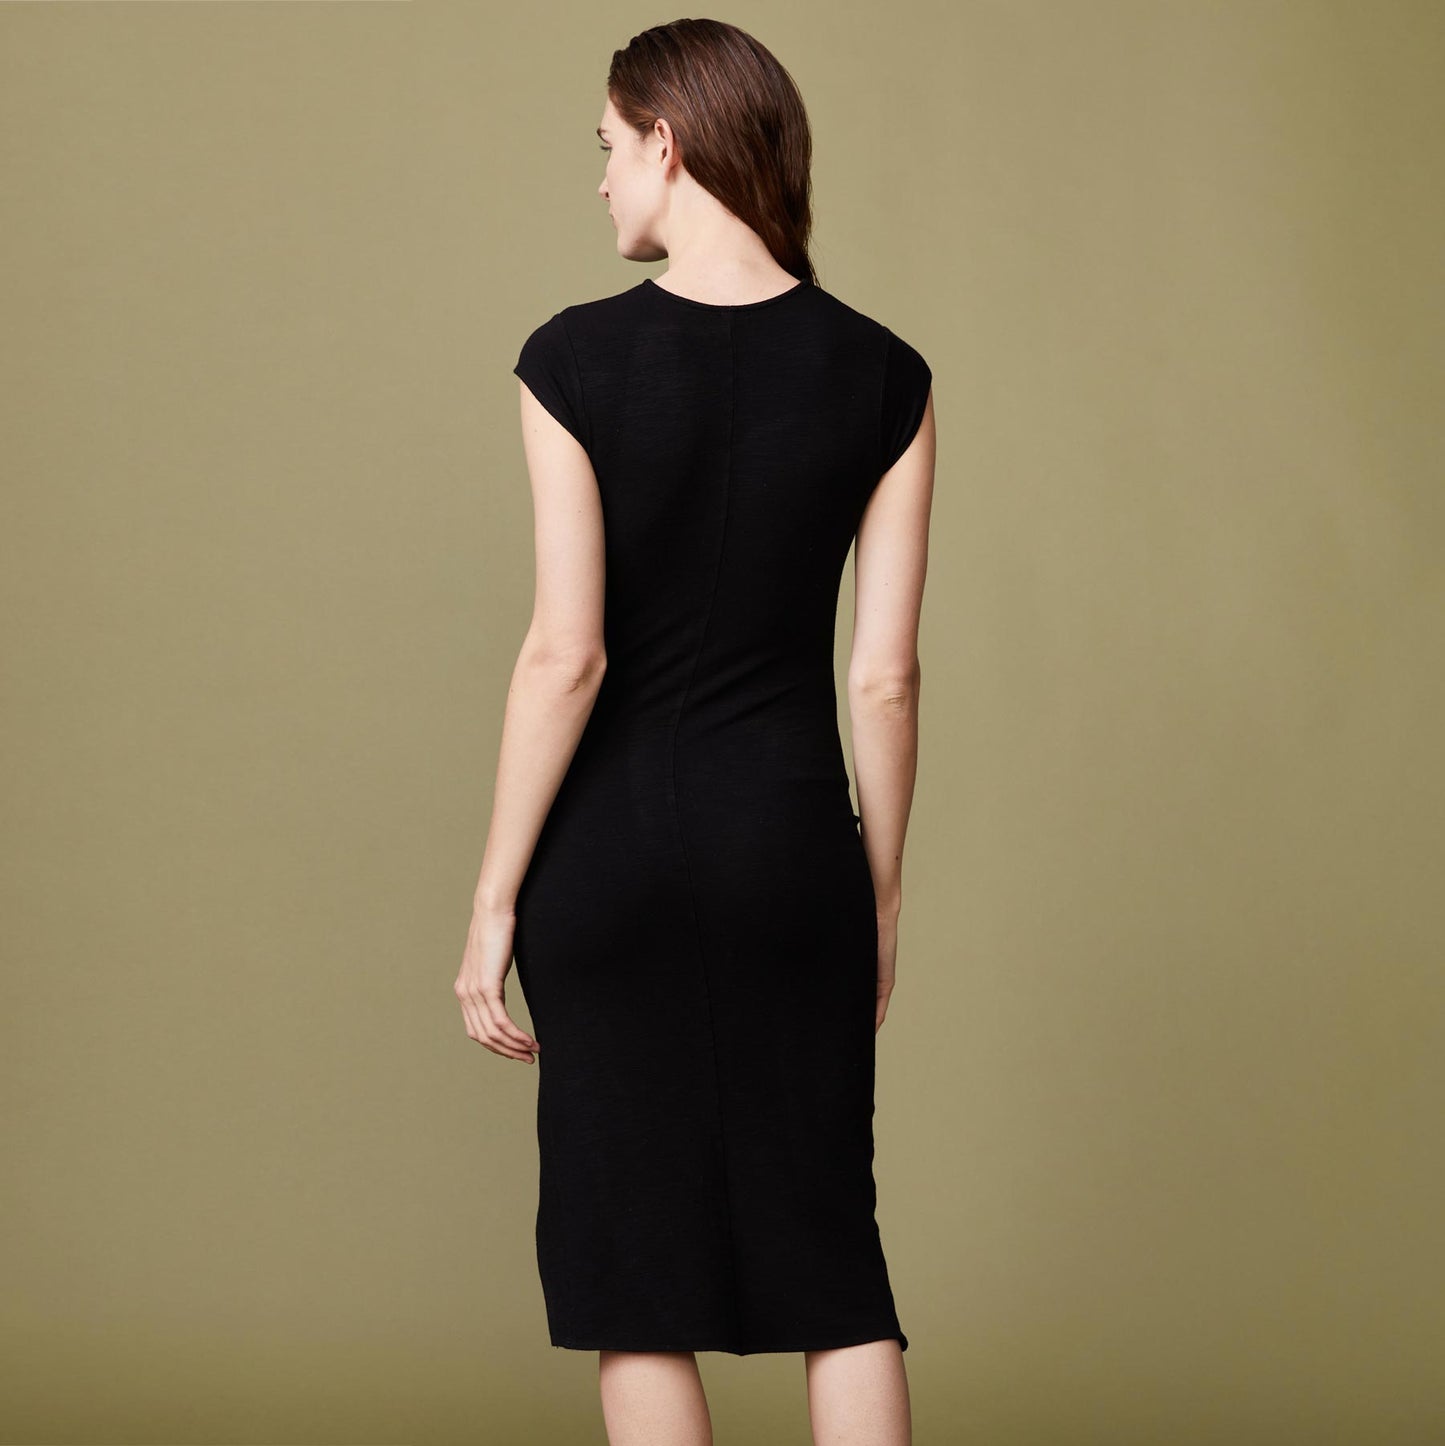 Back view of model wearing the supersoft cap sleeve shirred dress in black.